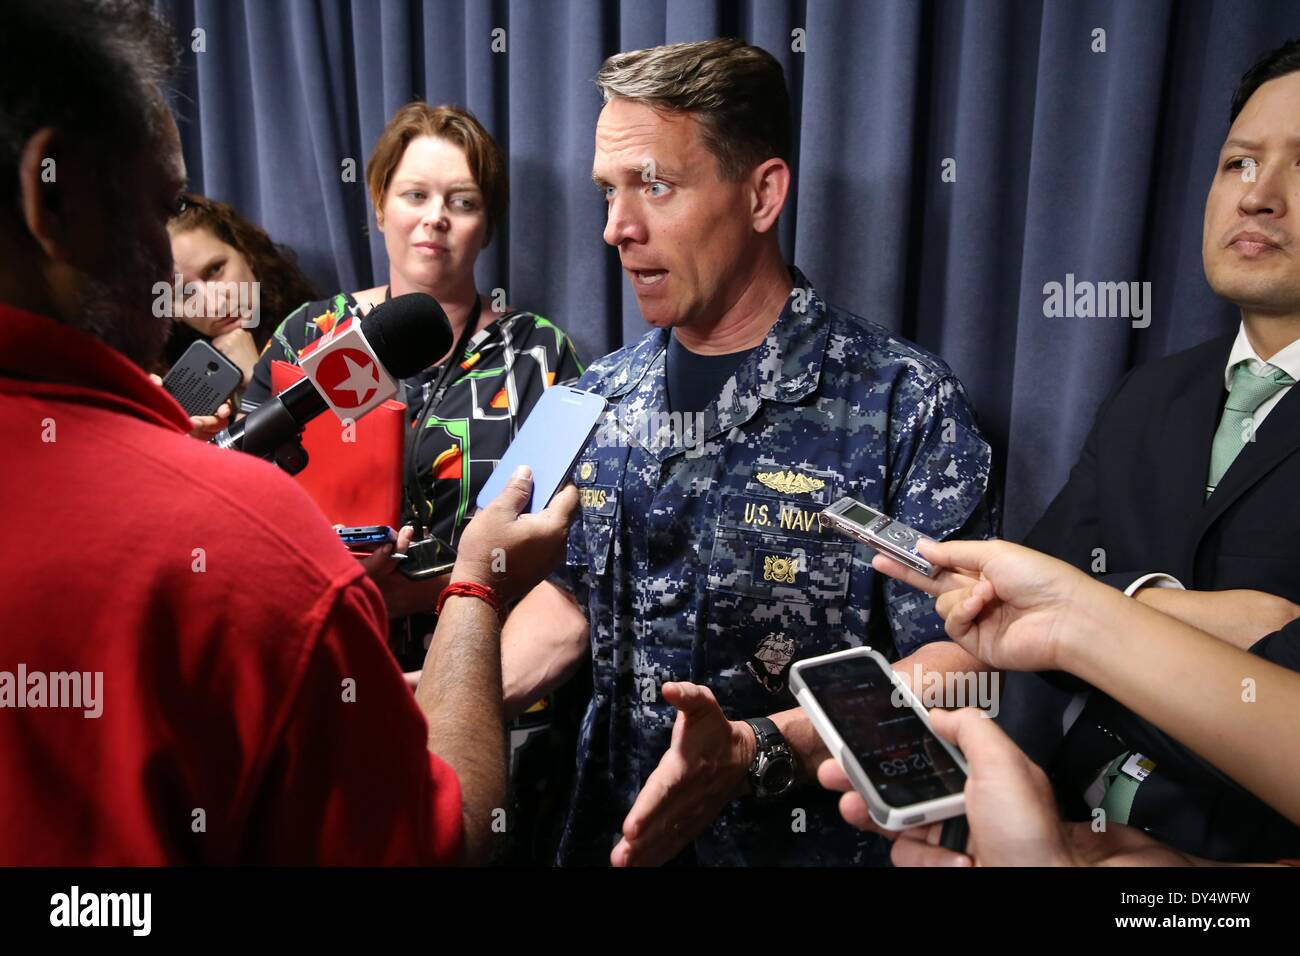 Perth, Australia. 7th Apr, 2014. U.S. Navy officer Mark Matthews (C) speaks to the media in Perth, Australia, on April 7, 2014. An Australian vessel searching the missing Malaysian flight 370 has detected electronic pulse signals probably related to the black box in the Indian Ocean during the past 24 hours. However, the unsuccessful effort to reacquire the signal later may suggest the battery may finish in a very short time, according to searching officials and U.S. Navy technicians. Credit:  Xu Yanyan/Xinhua/Alamy Live News Stock Photo